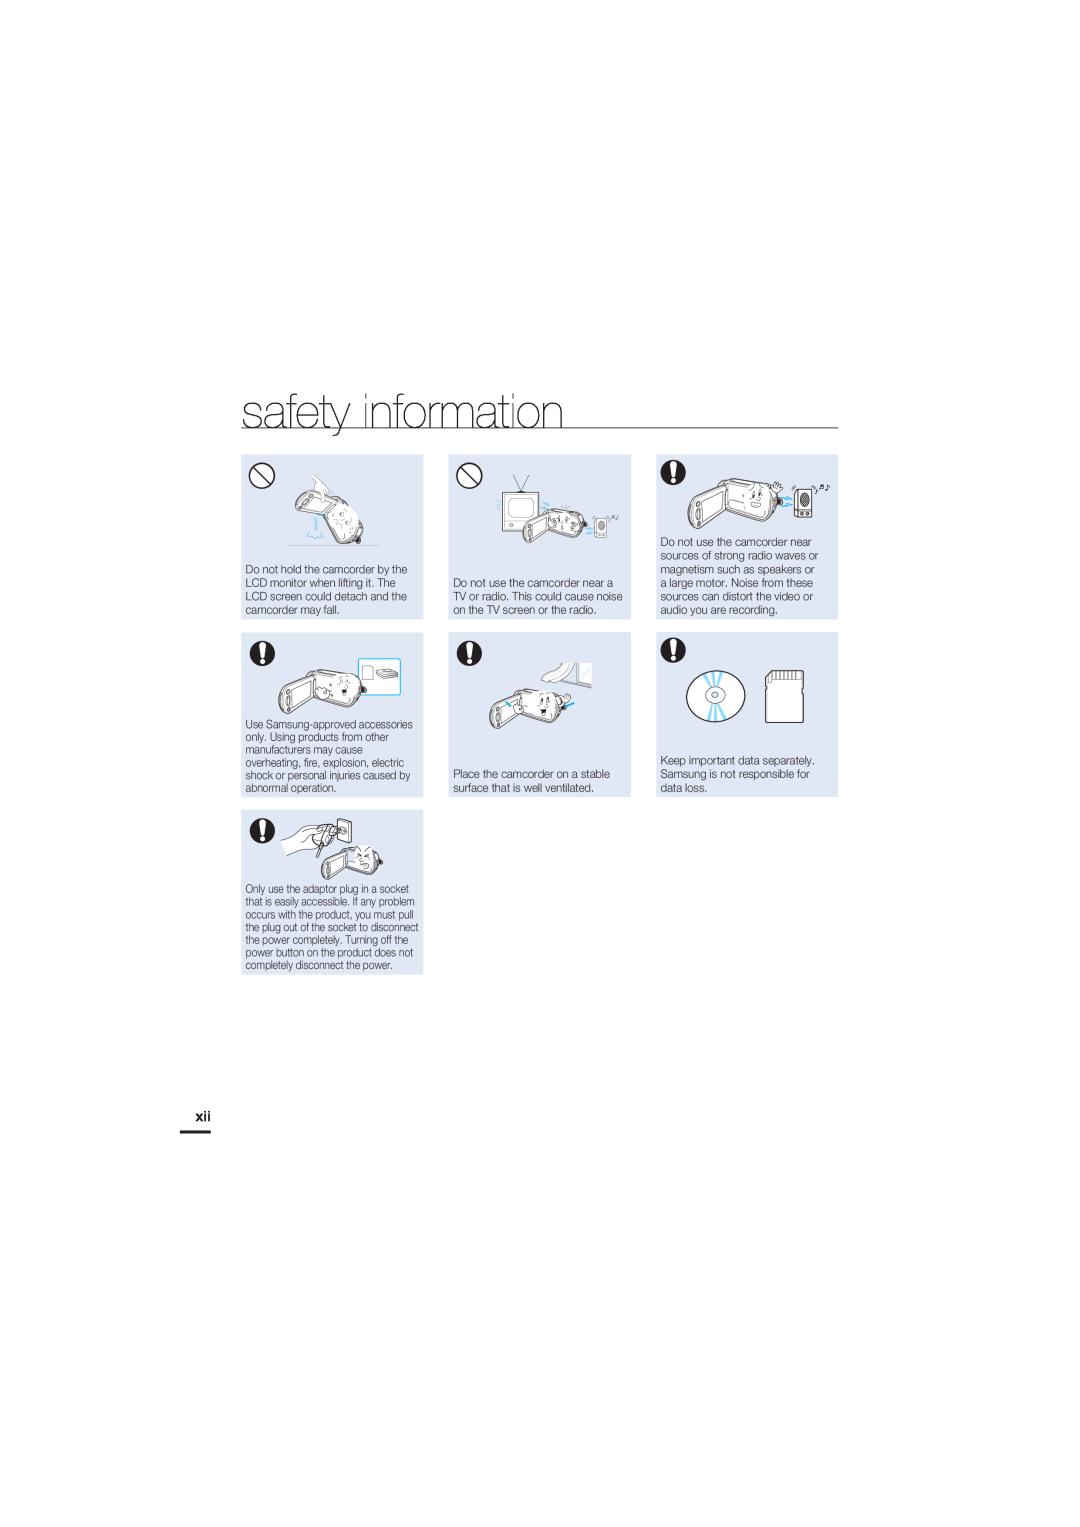 Samsung HMX-S15BN/XAA, HMX-S10BN/XAA safety information, Place the camcorder on a stable surface that is well ventilated 